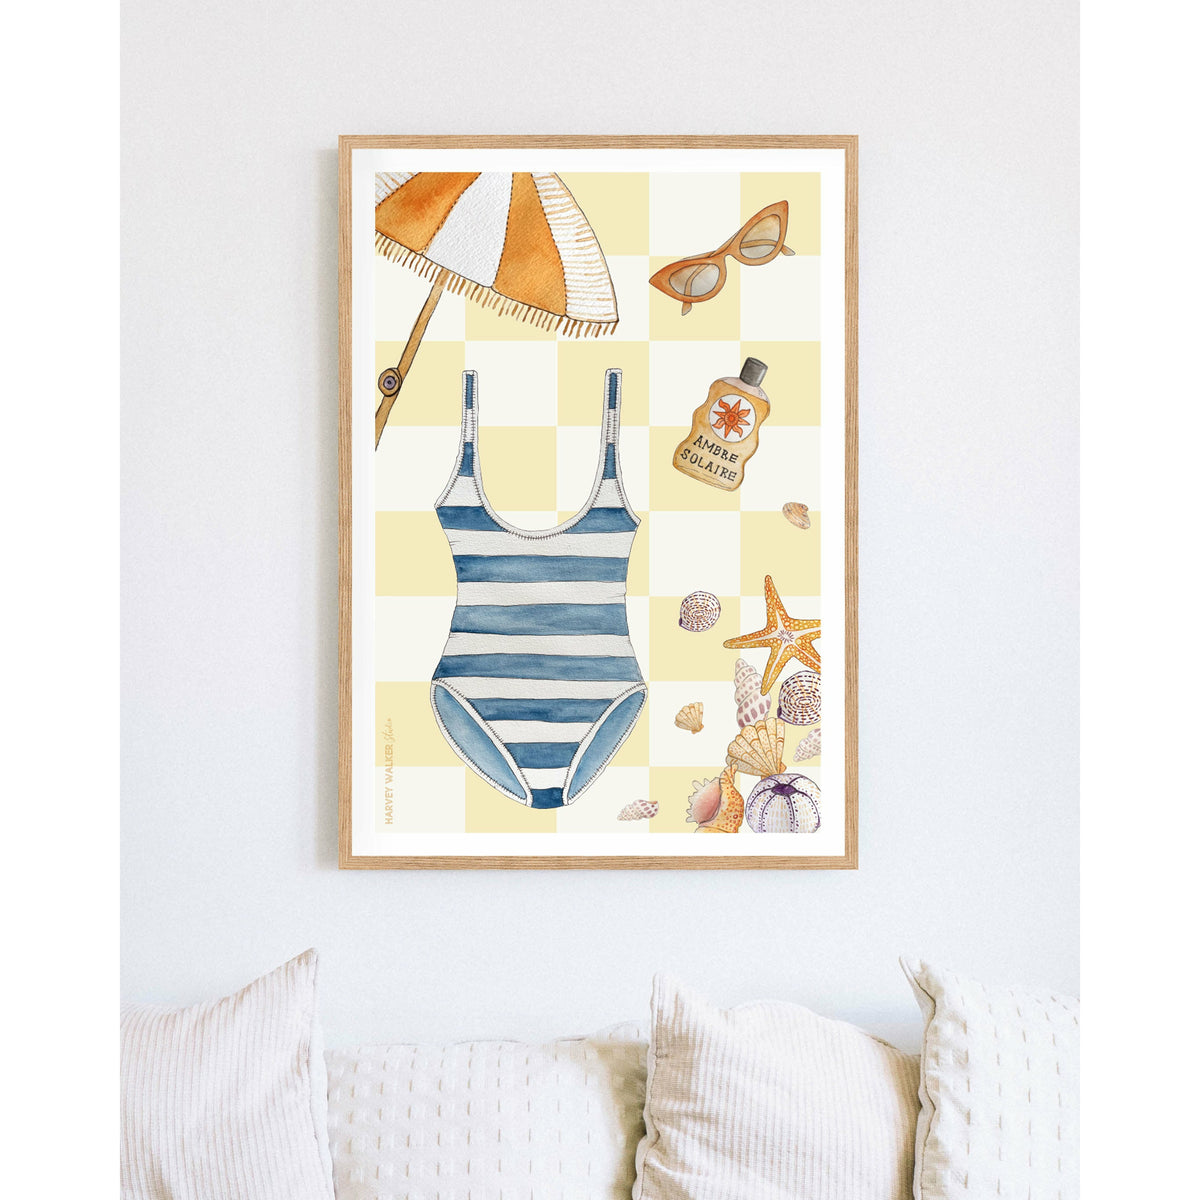 Bring your living room to life with this coastal fine art print.Retreat to the beach with this yellow and white check print. With umbrellas, swimsuits and shells this print is perfect for giving you a feeling of being on holiday every day. Lovingly hand illustrated and great renovation prints like in laundry or office areas.